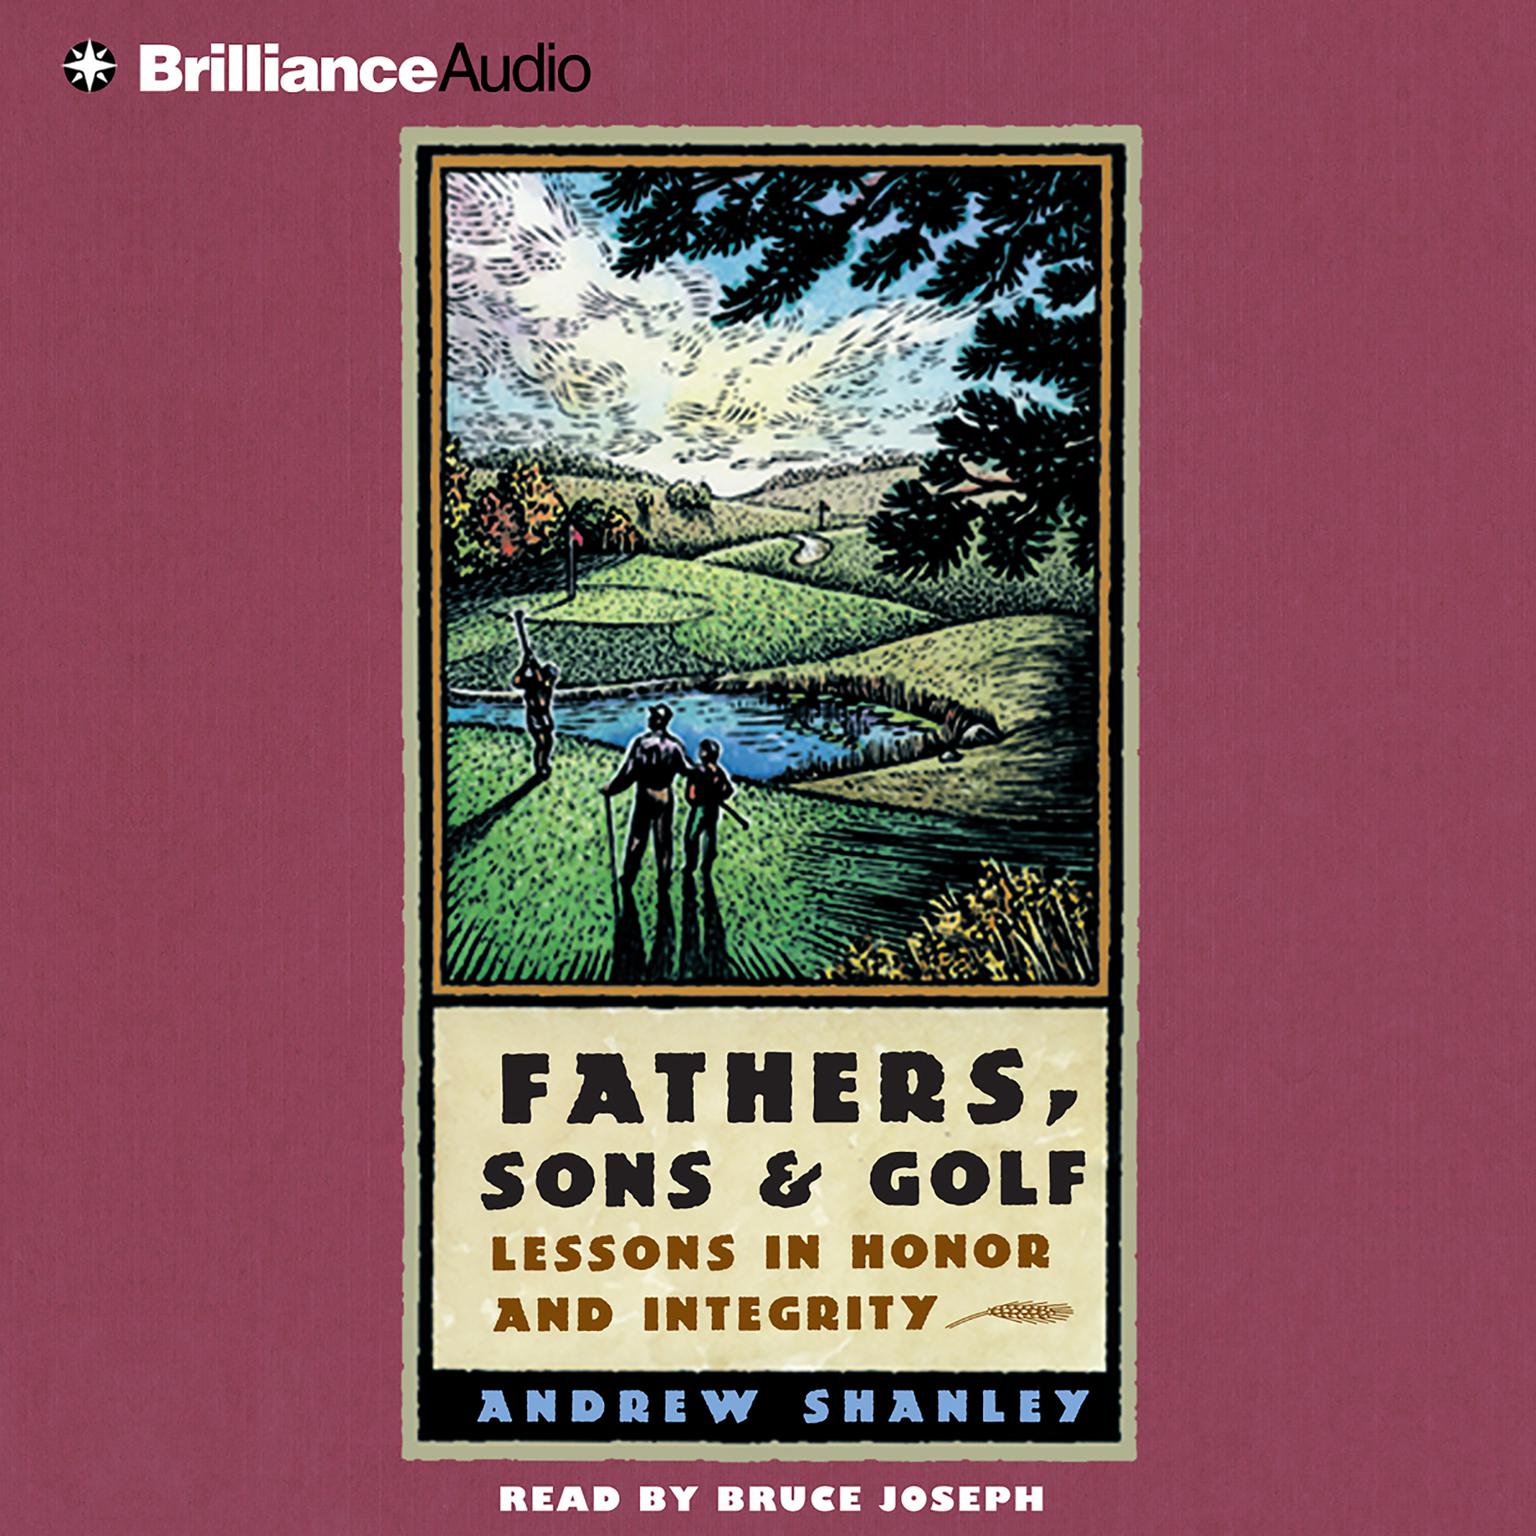 Fathers, Sons and Golf (Abridged): Lessons in Honor and Integrity Audiobook, by Andrew Shanley